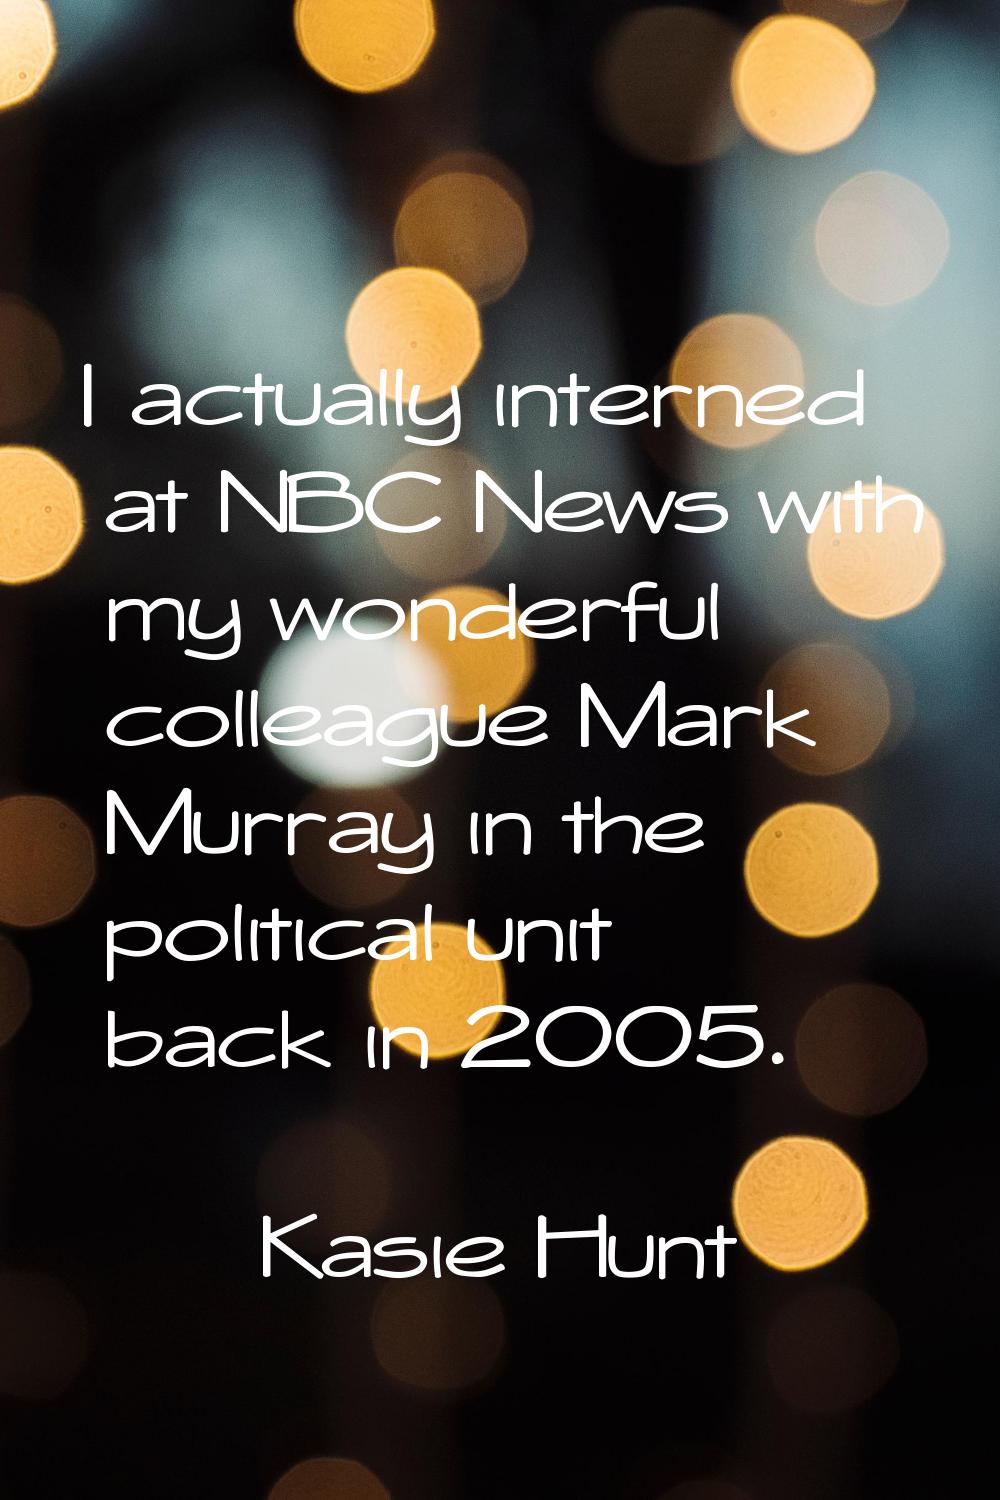 I actually interned at NBC News with my wonderful colleague Mark Murray in the political unit back 